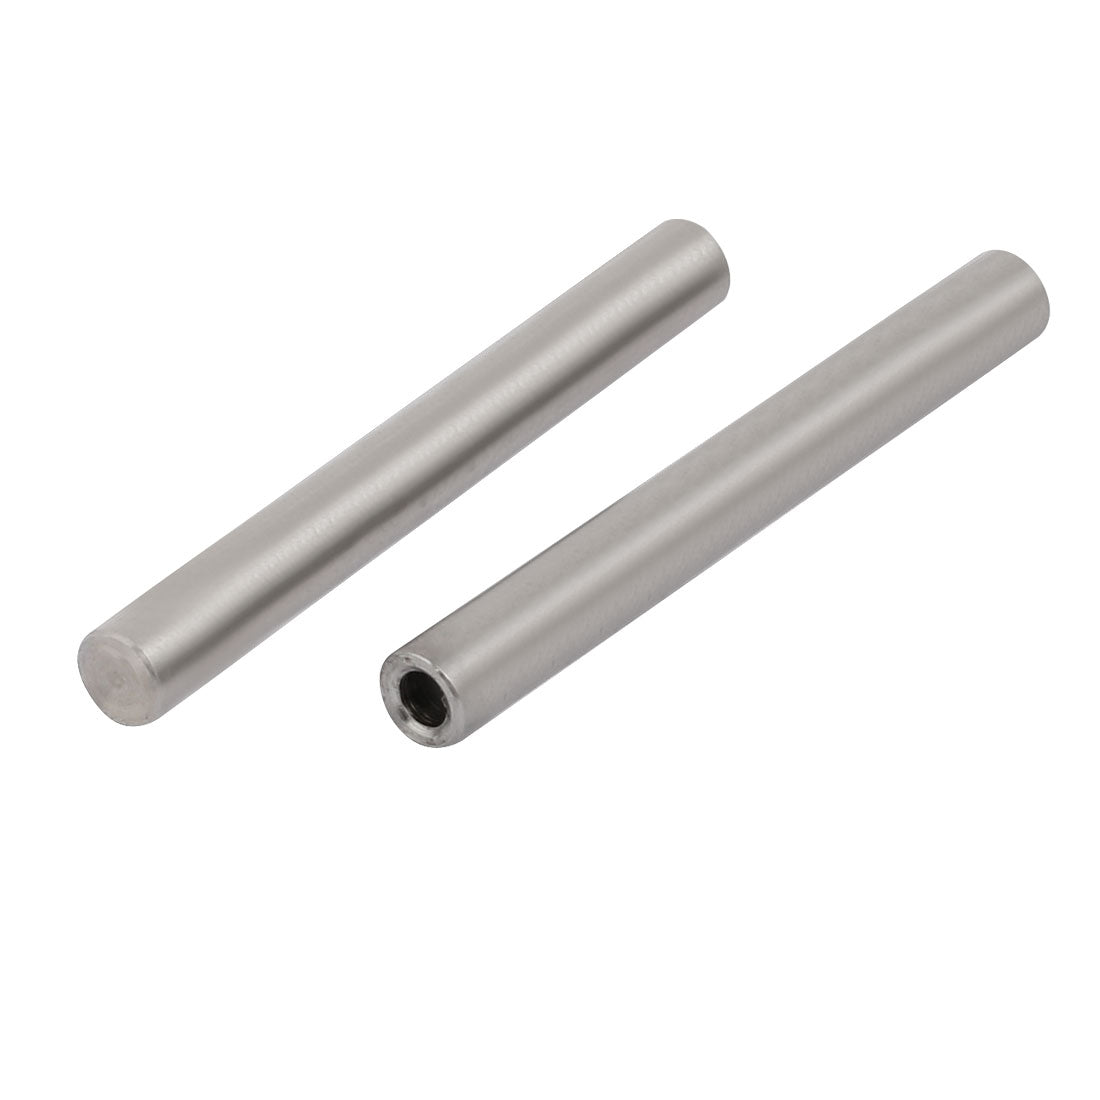 uxcell Uxcell 304 Stainless Steel M3 Female Thread 5mm x 45mm Cylindrical Dowel Pin 6pcs